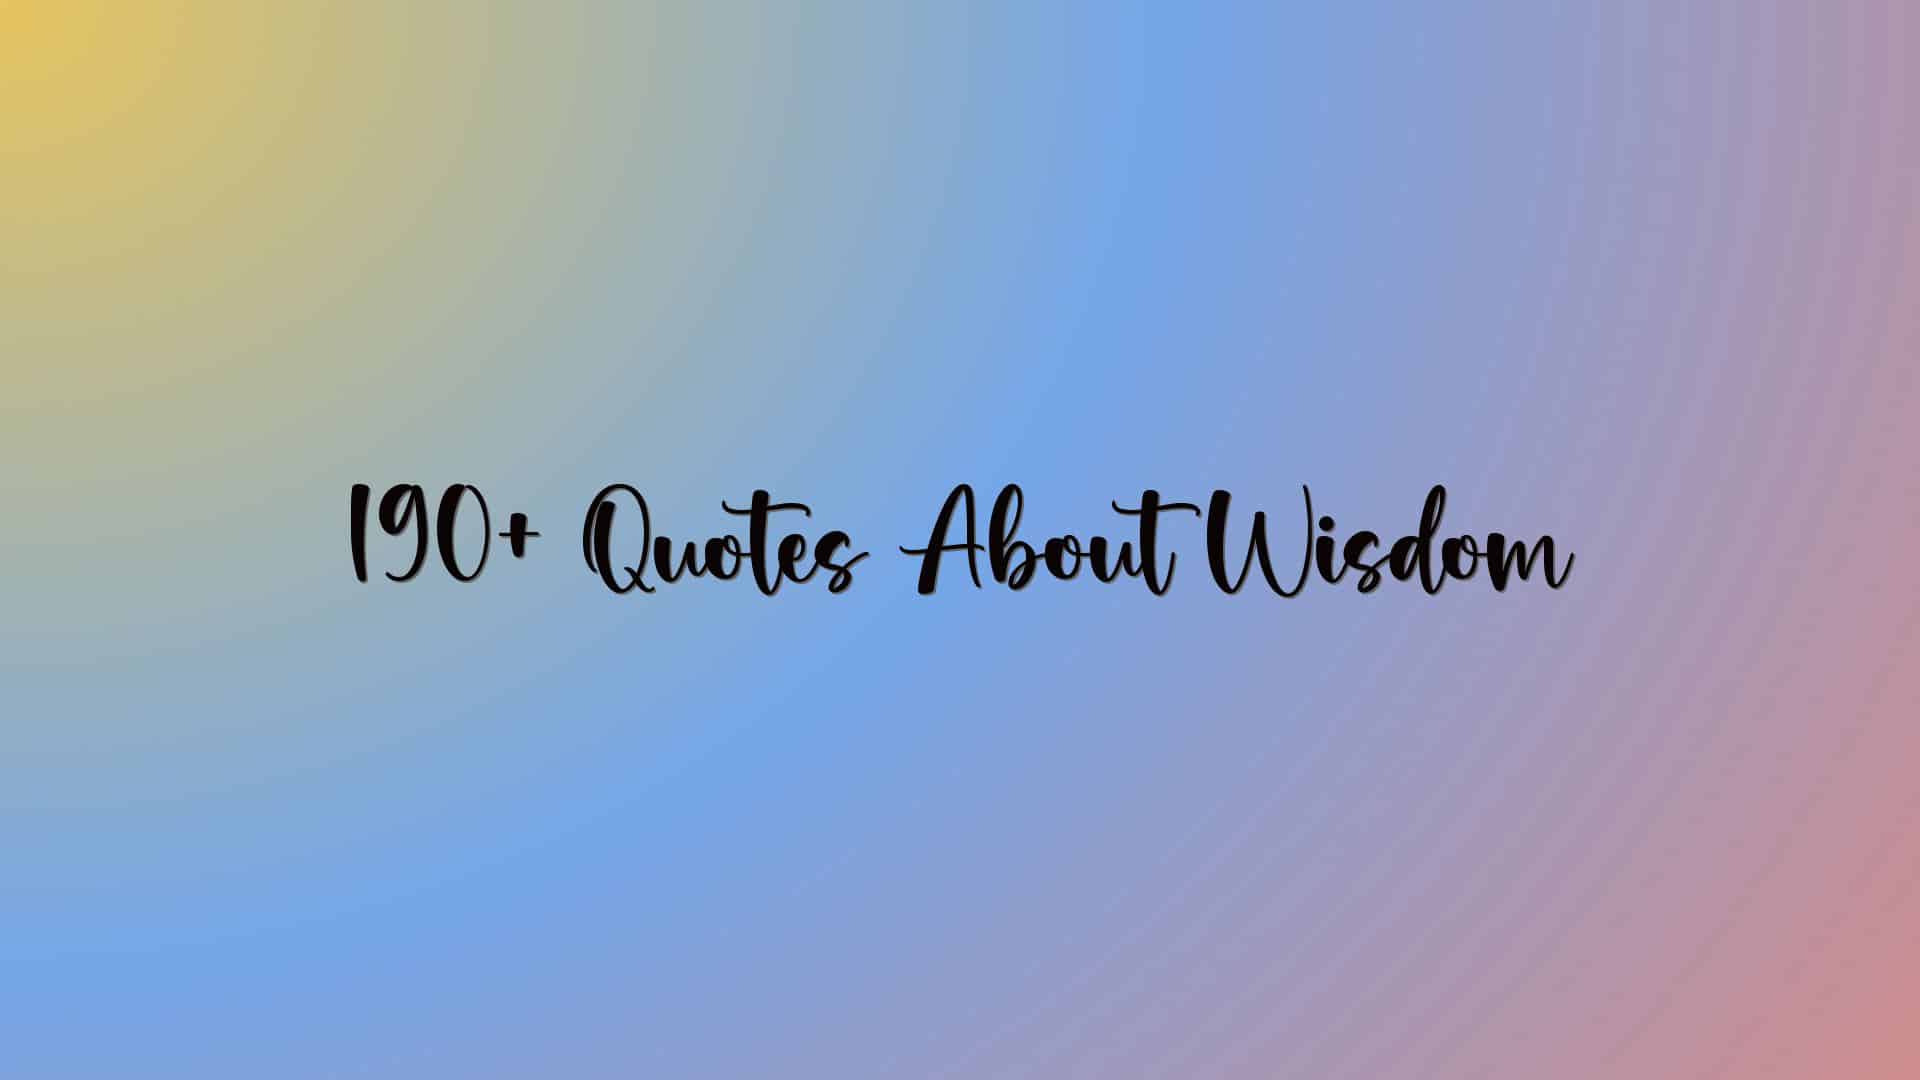 190+ Quotes About Wisdom